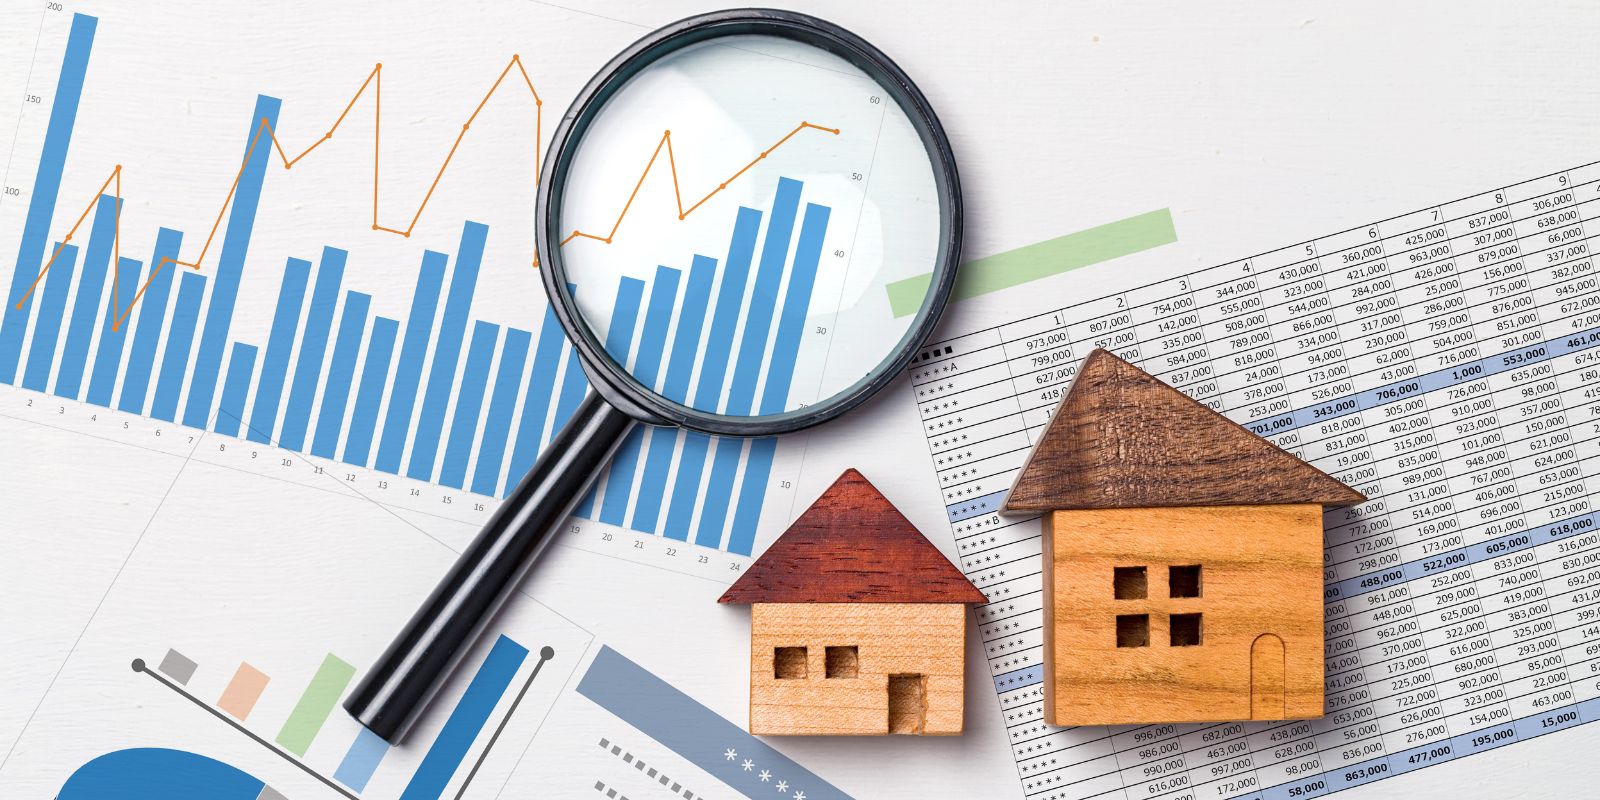 Table with magnifying glass, toy house and graphs about real estate market